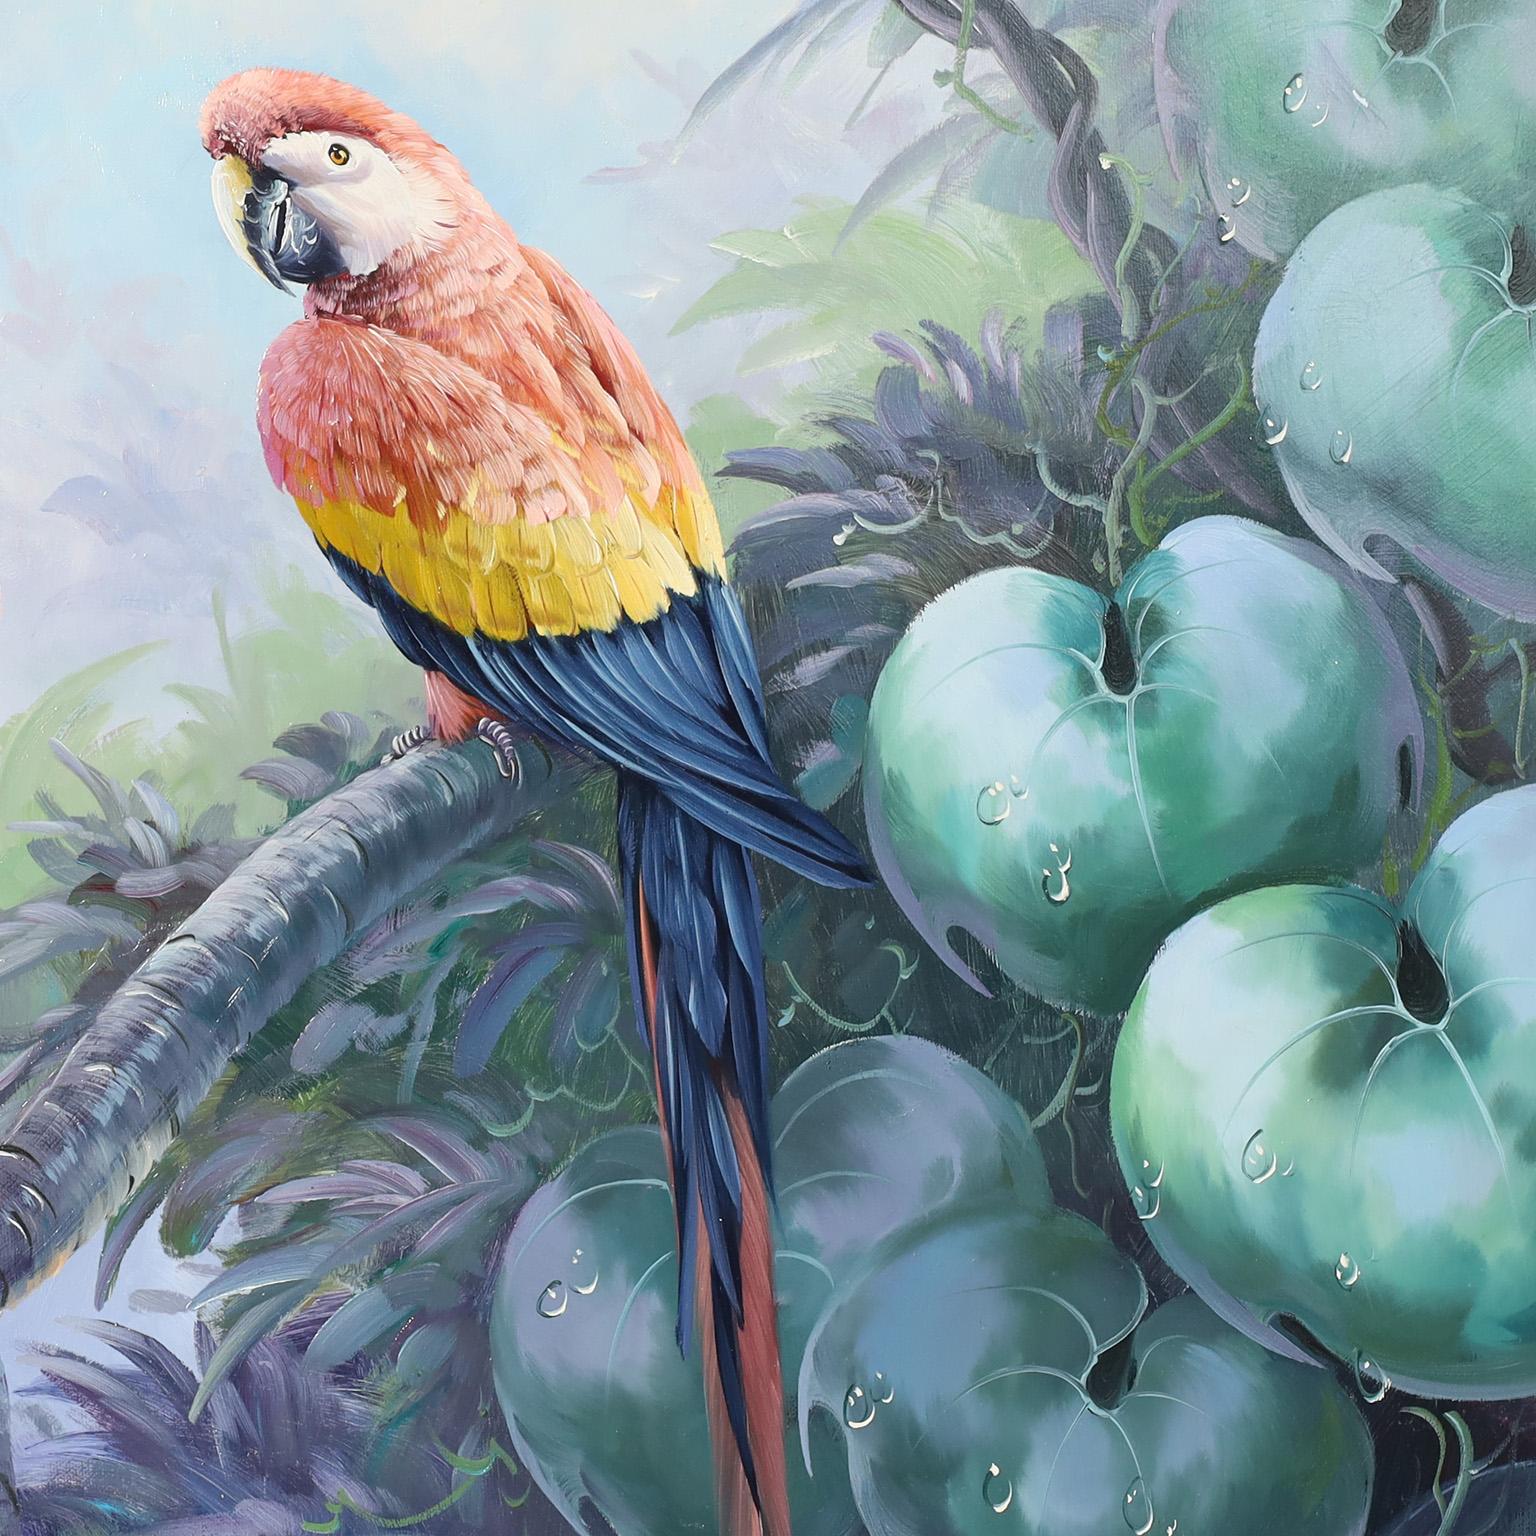 Striking oil painting on canvas of three parrots in a natural rain forest setting executed with hyper realism technique. Signed by noted American artist Andre Lange and presented in a faux bamboo gilt wood frame.